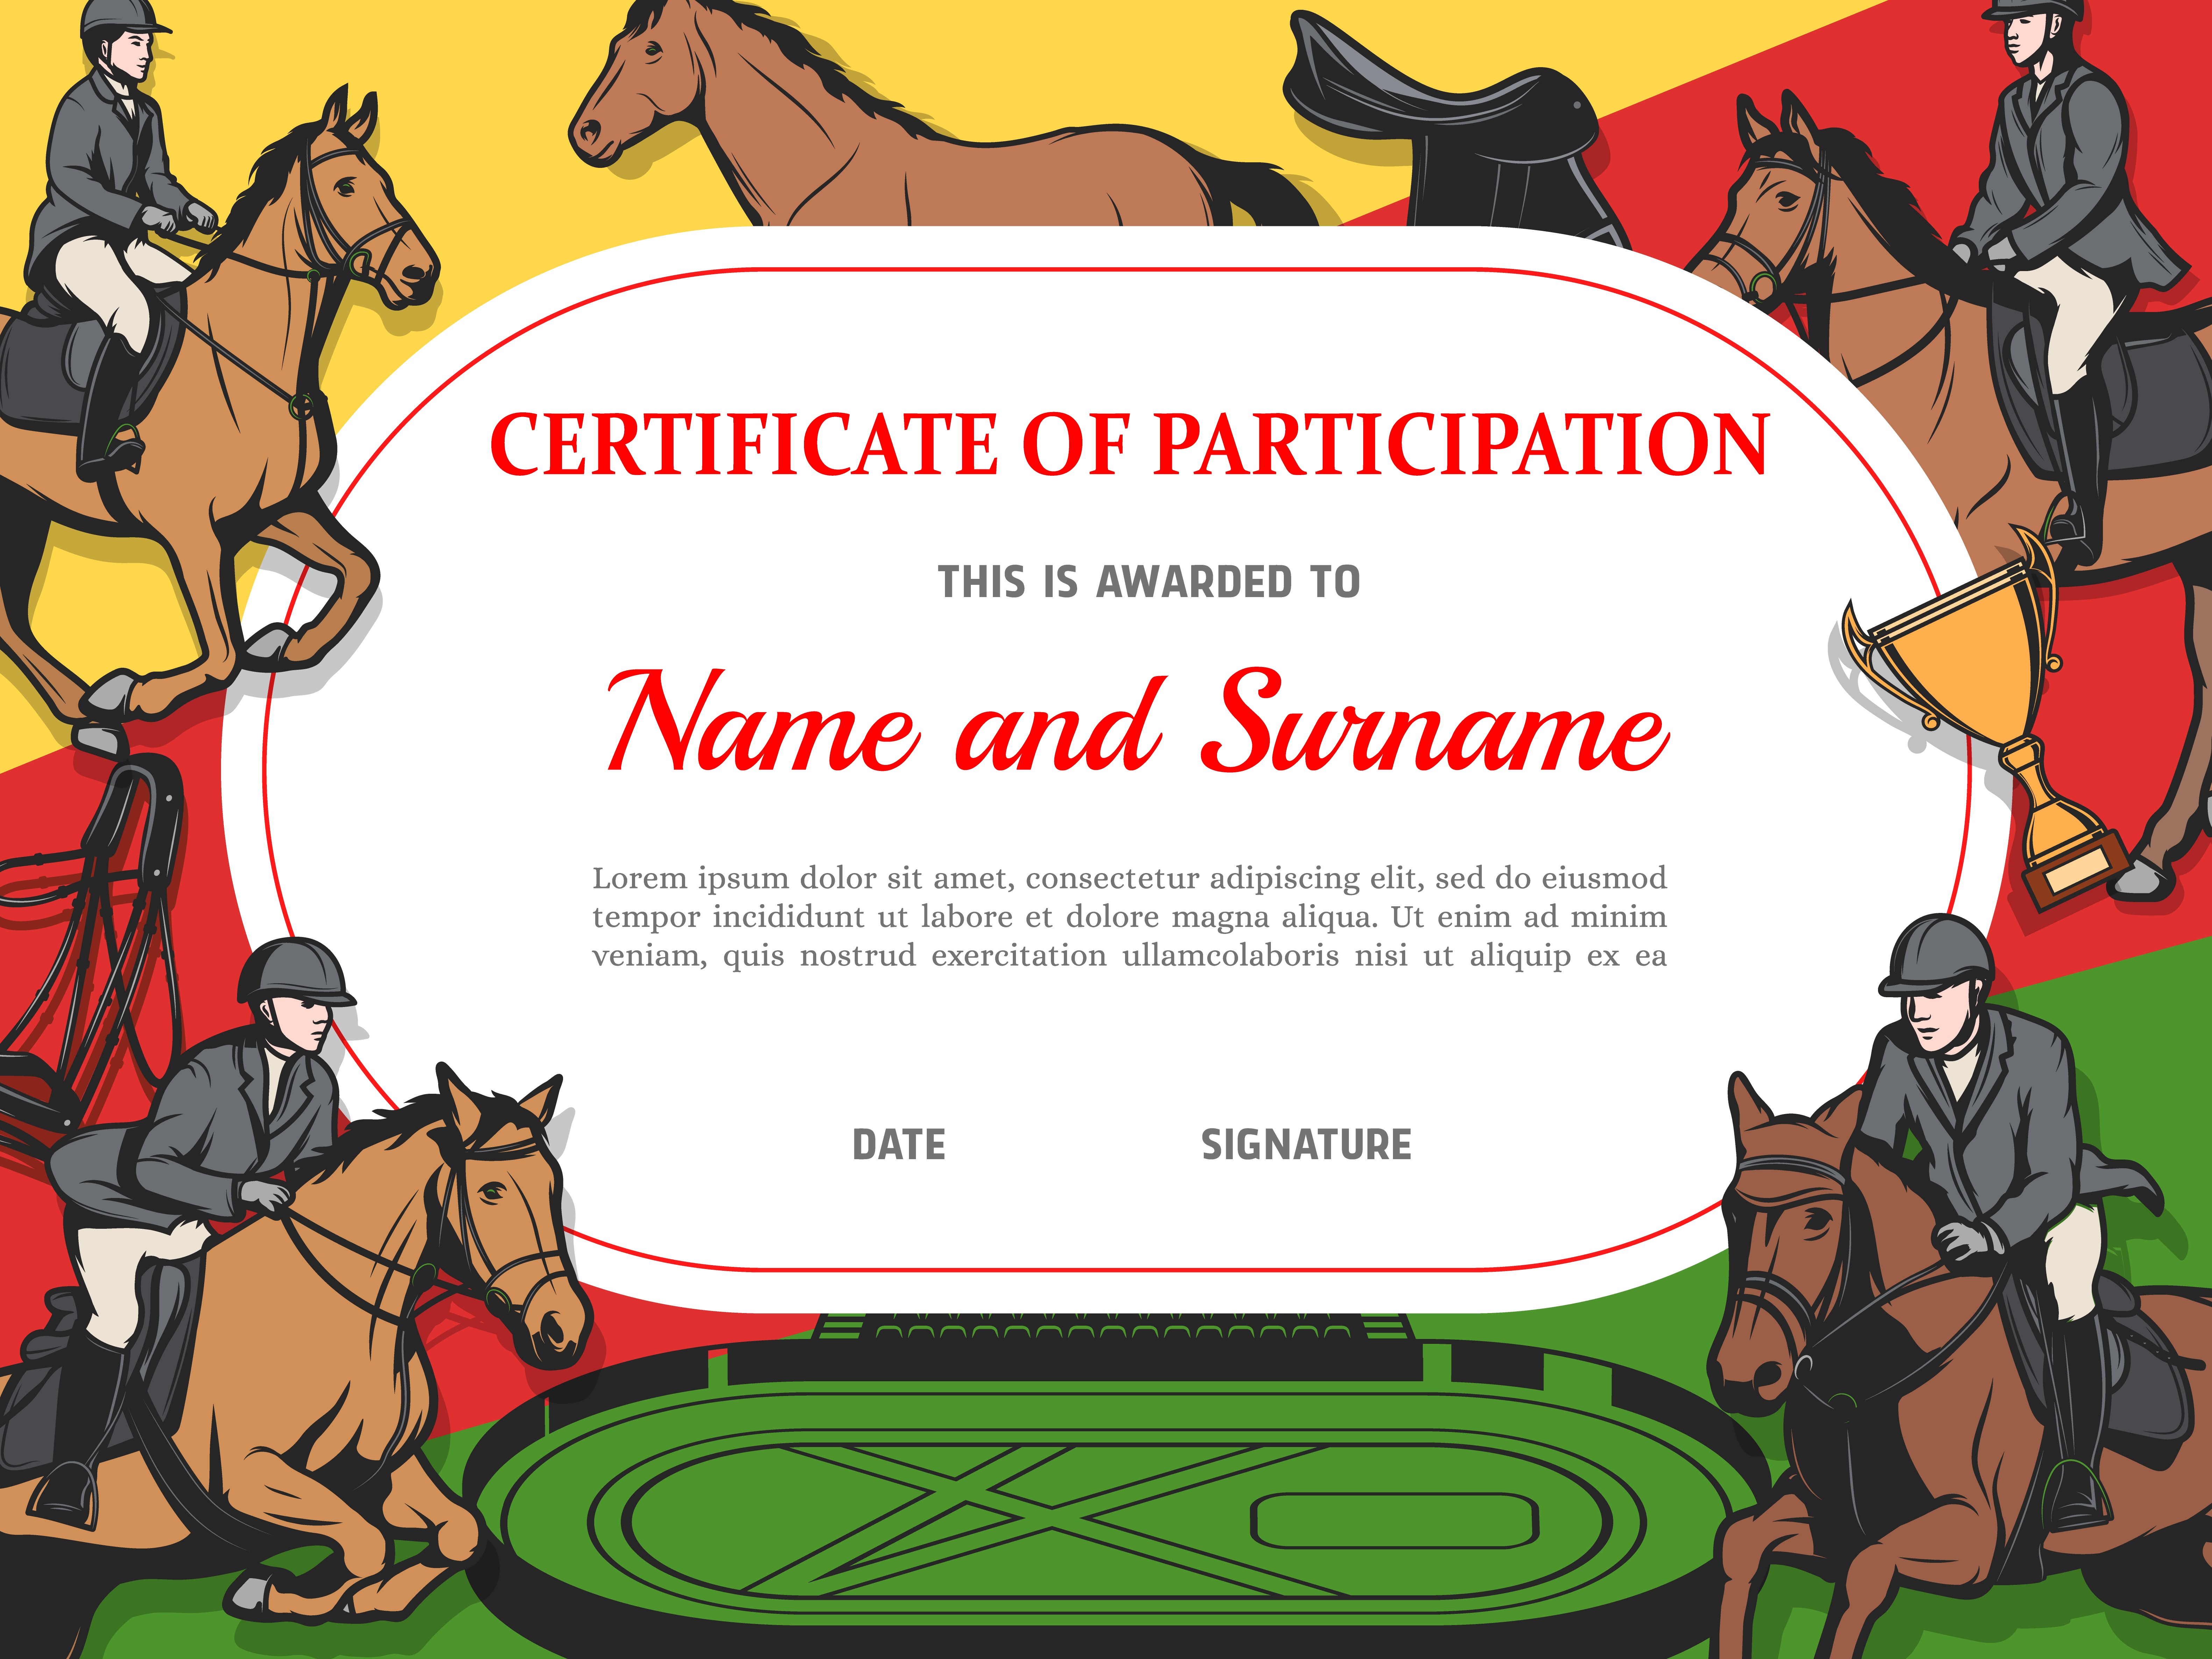 Certificate of participation in horse race, diploma vector template. Stallion racing award border design with horse riders on hippodrome. Victory celebration diploma or best result achievement border. Certificate of participation in horse race diploma